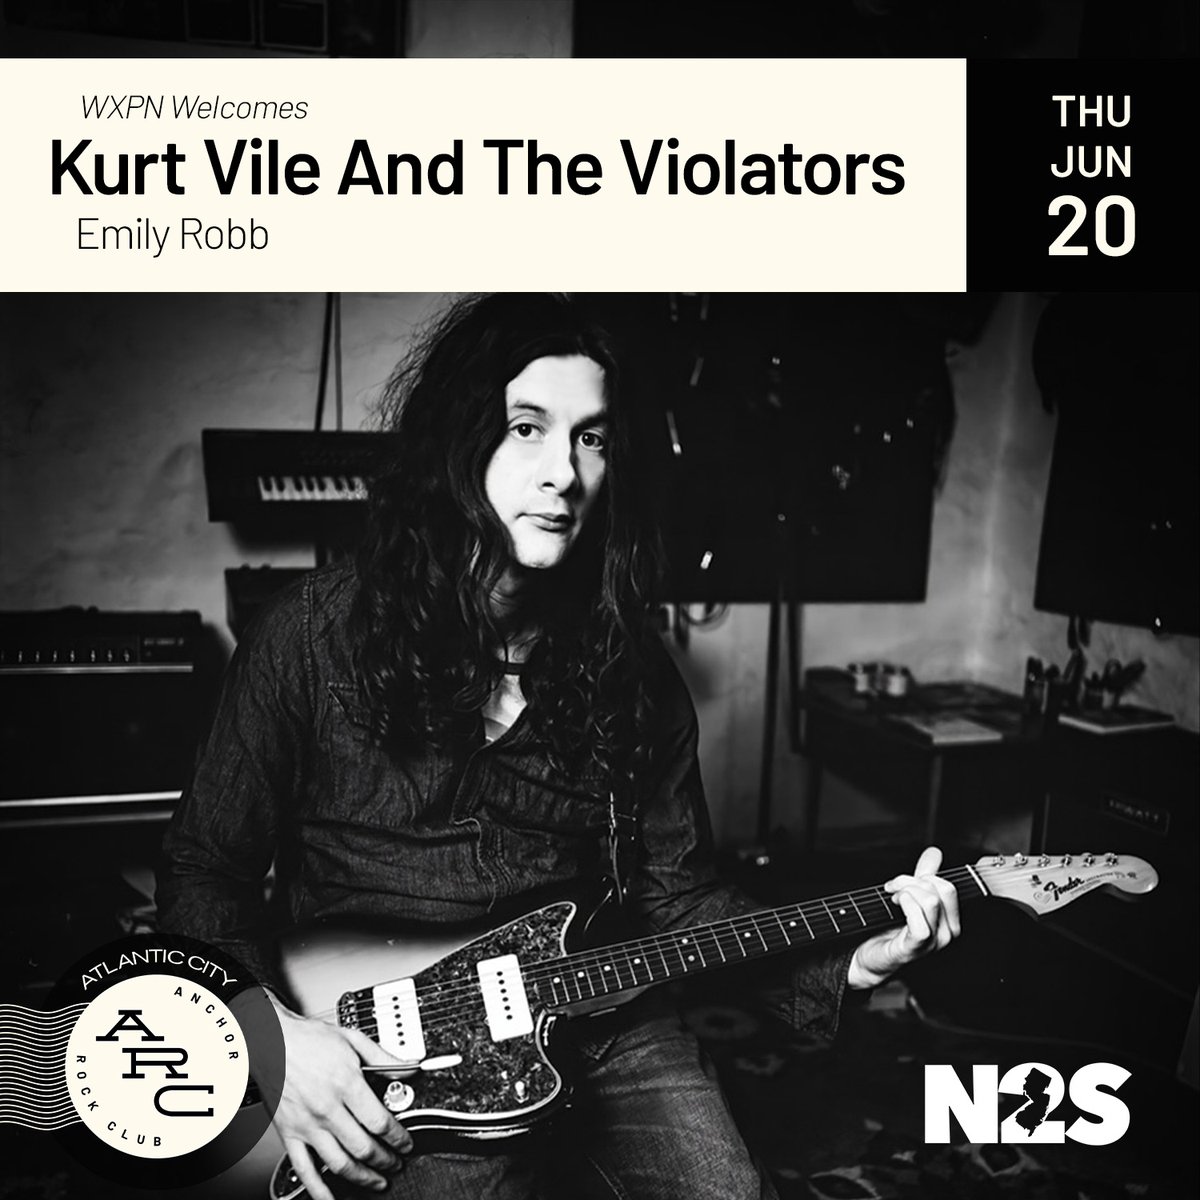 Atlantic City, NJ! Kurt and the Violators are playing @AnchorRockClub this June with Emily Robb as part of the @NorthtoShore Festival. Artist Presale Tickets on sale now with password KVN2S tixr.com/e/97394